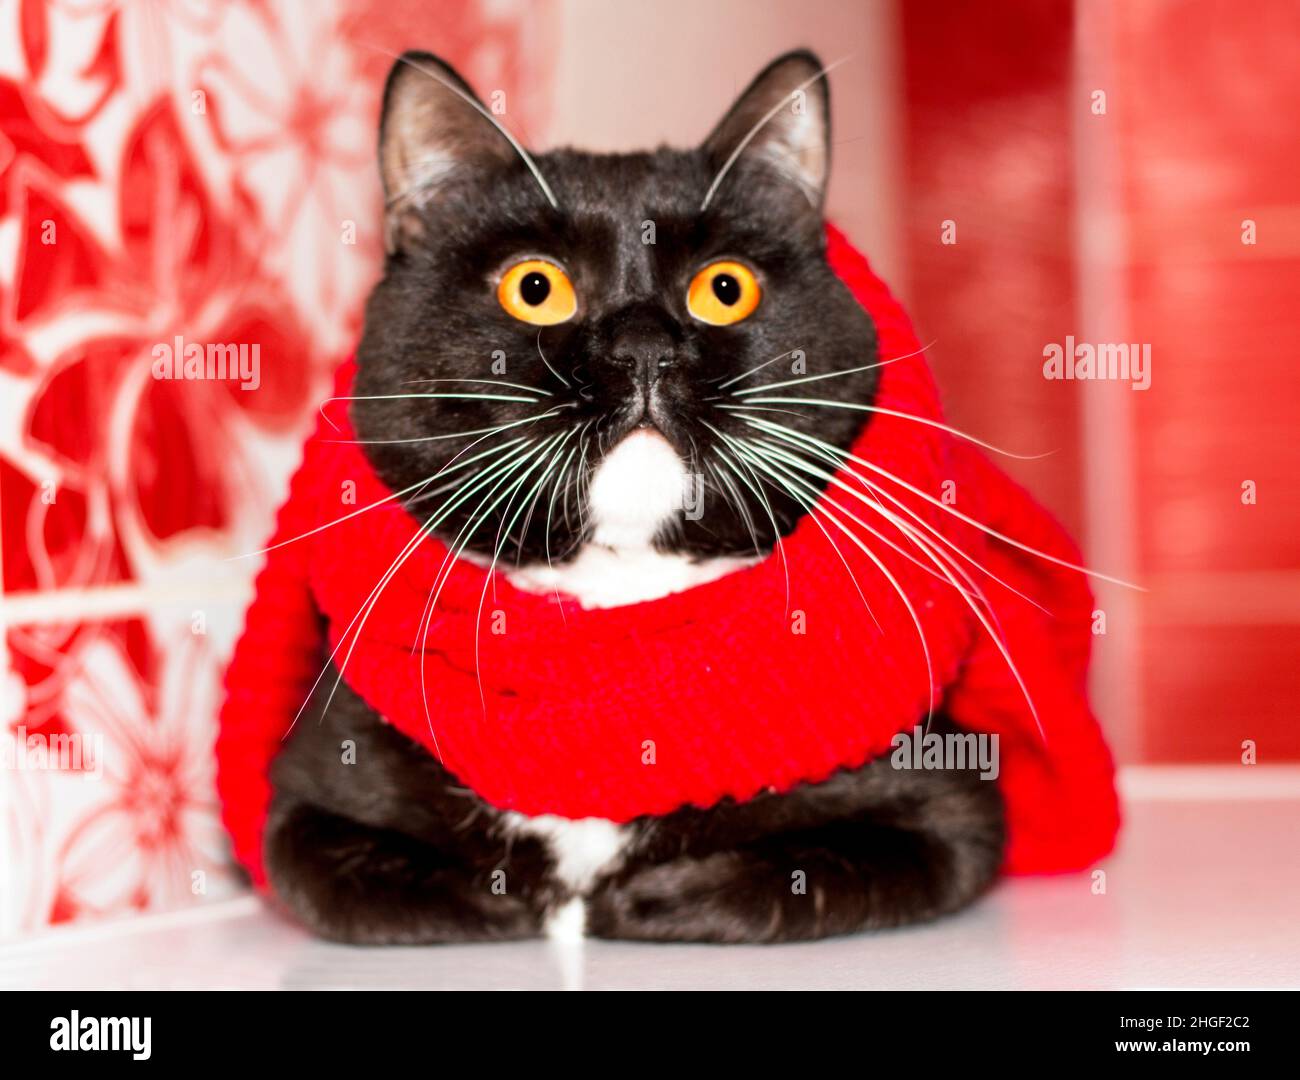 Powerful Scottish bicolor cat close-up basking in a red scarf, winter is cold, theme cats, kittens and cats in the house, pets their photos and their Stock Photo